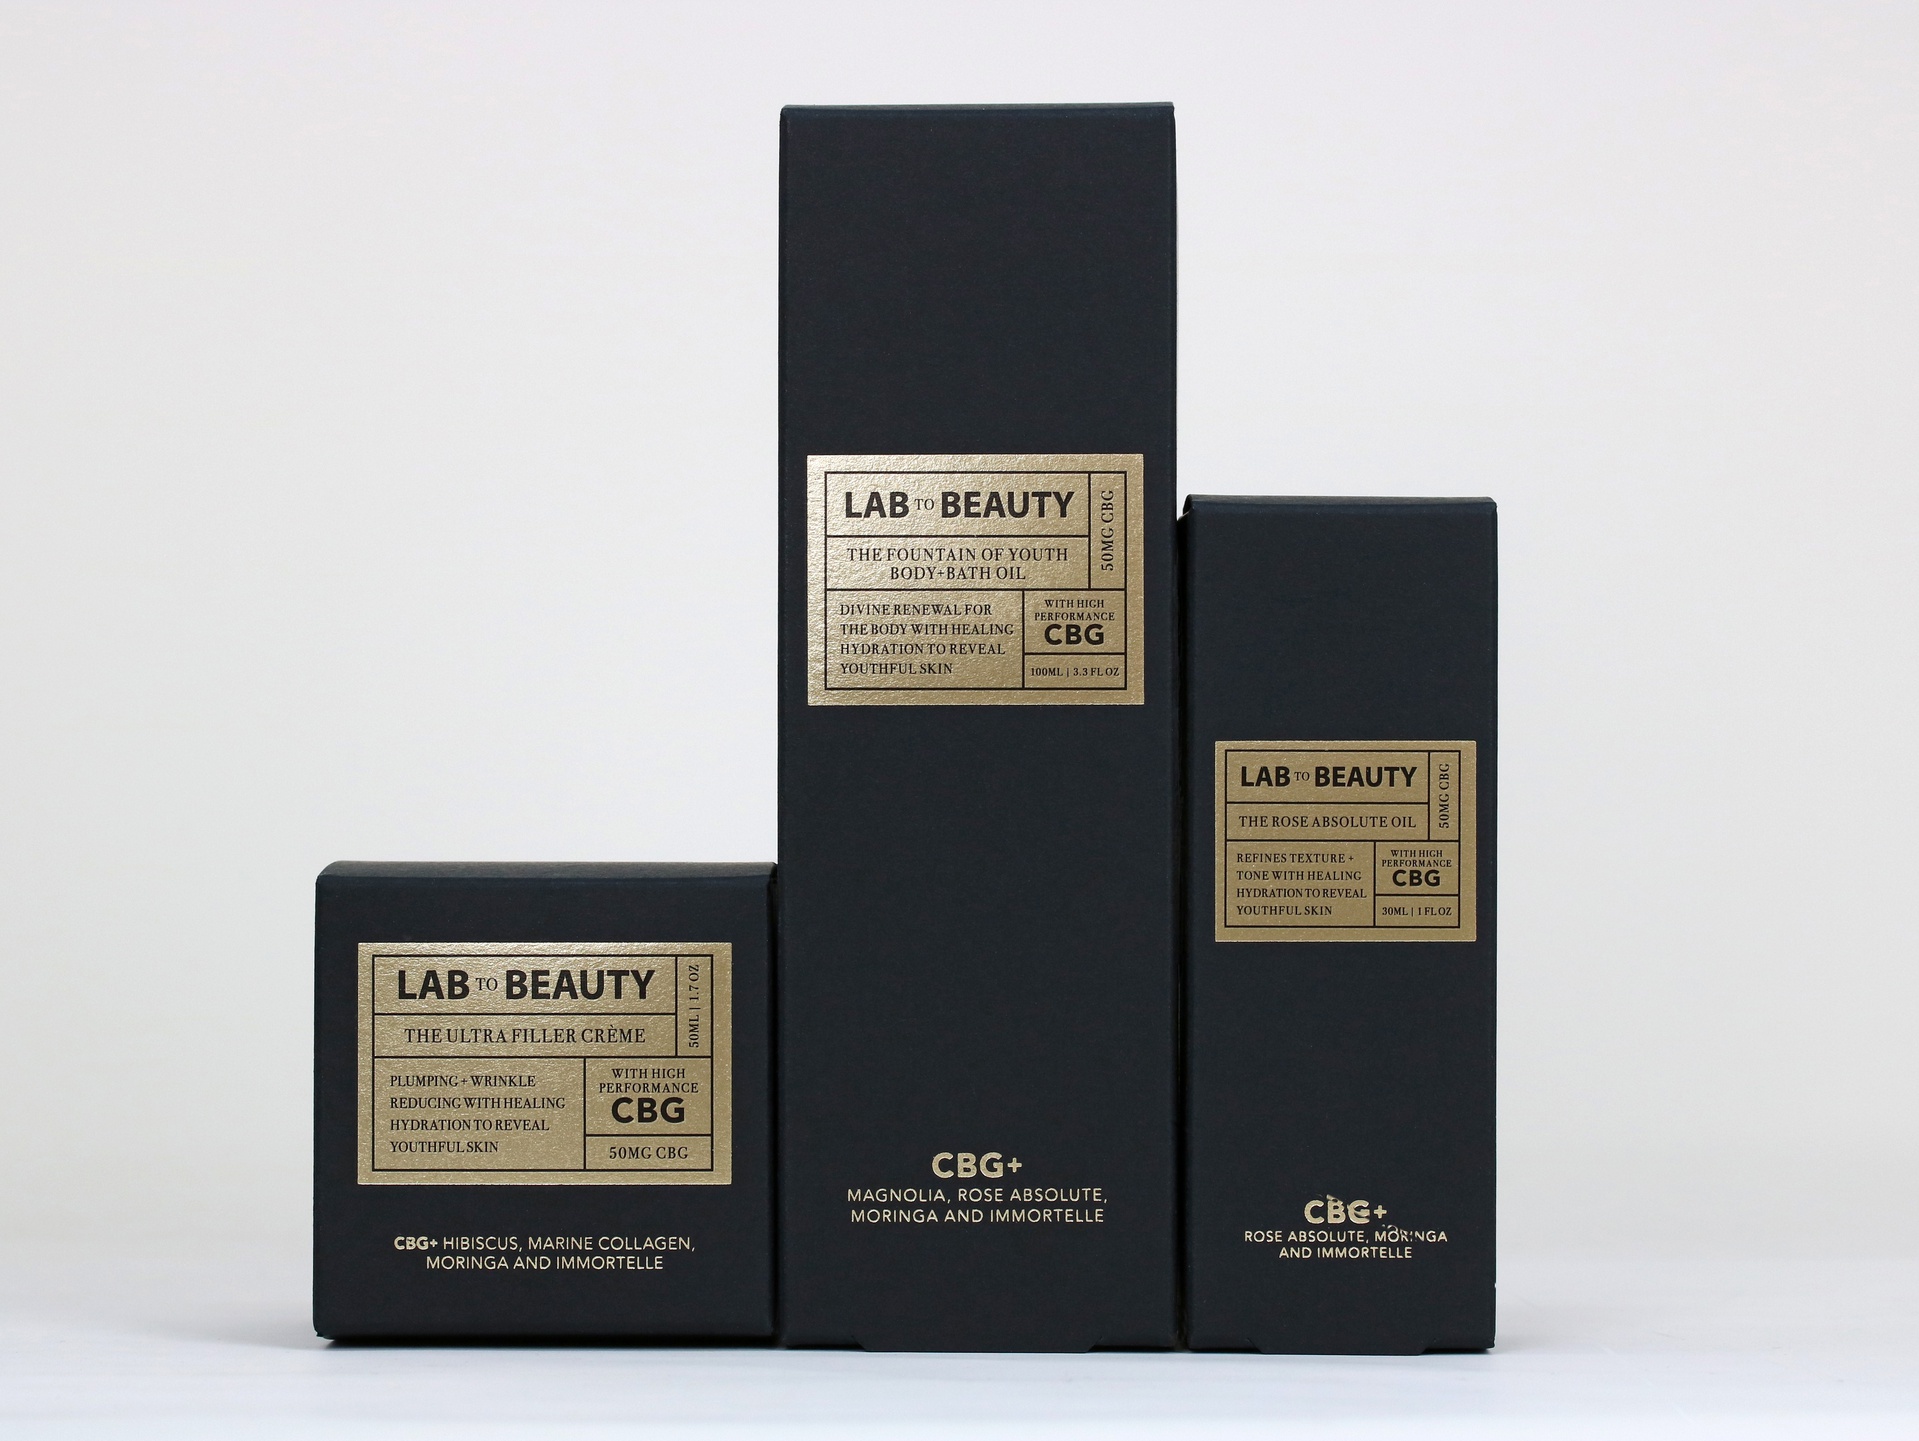 Lab to Beauty CBG packaging